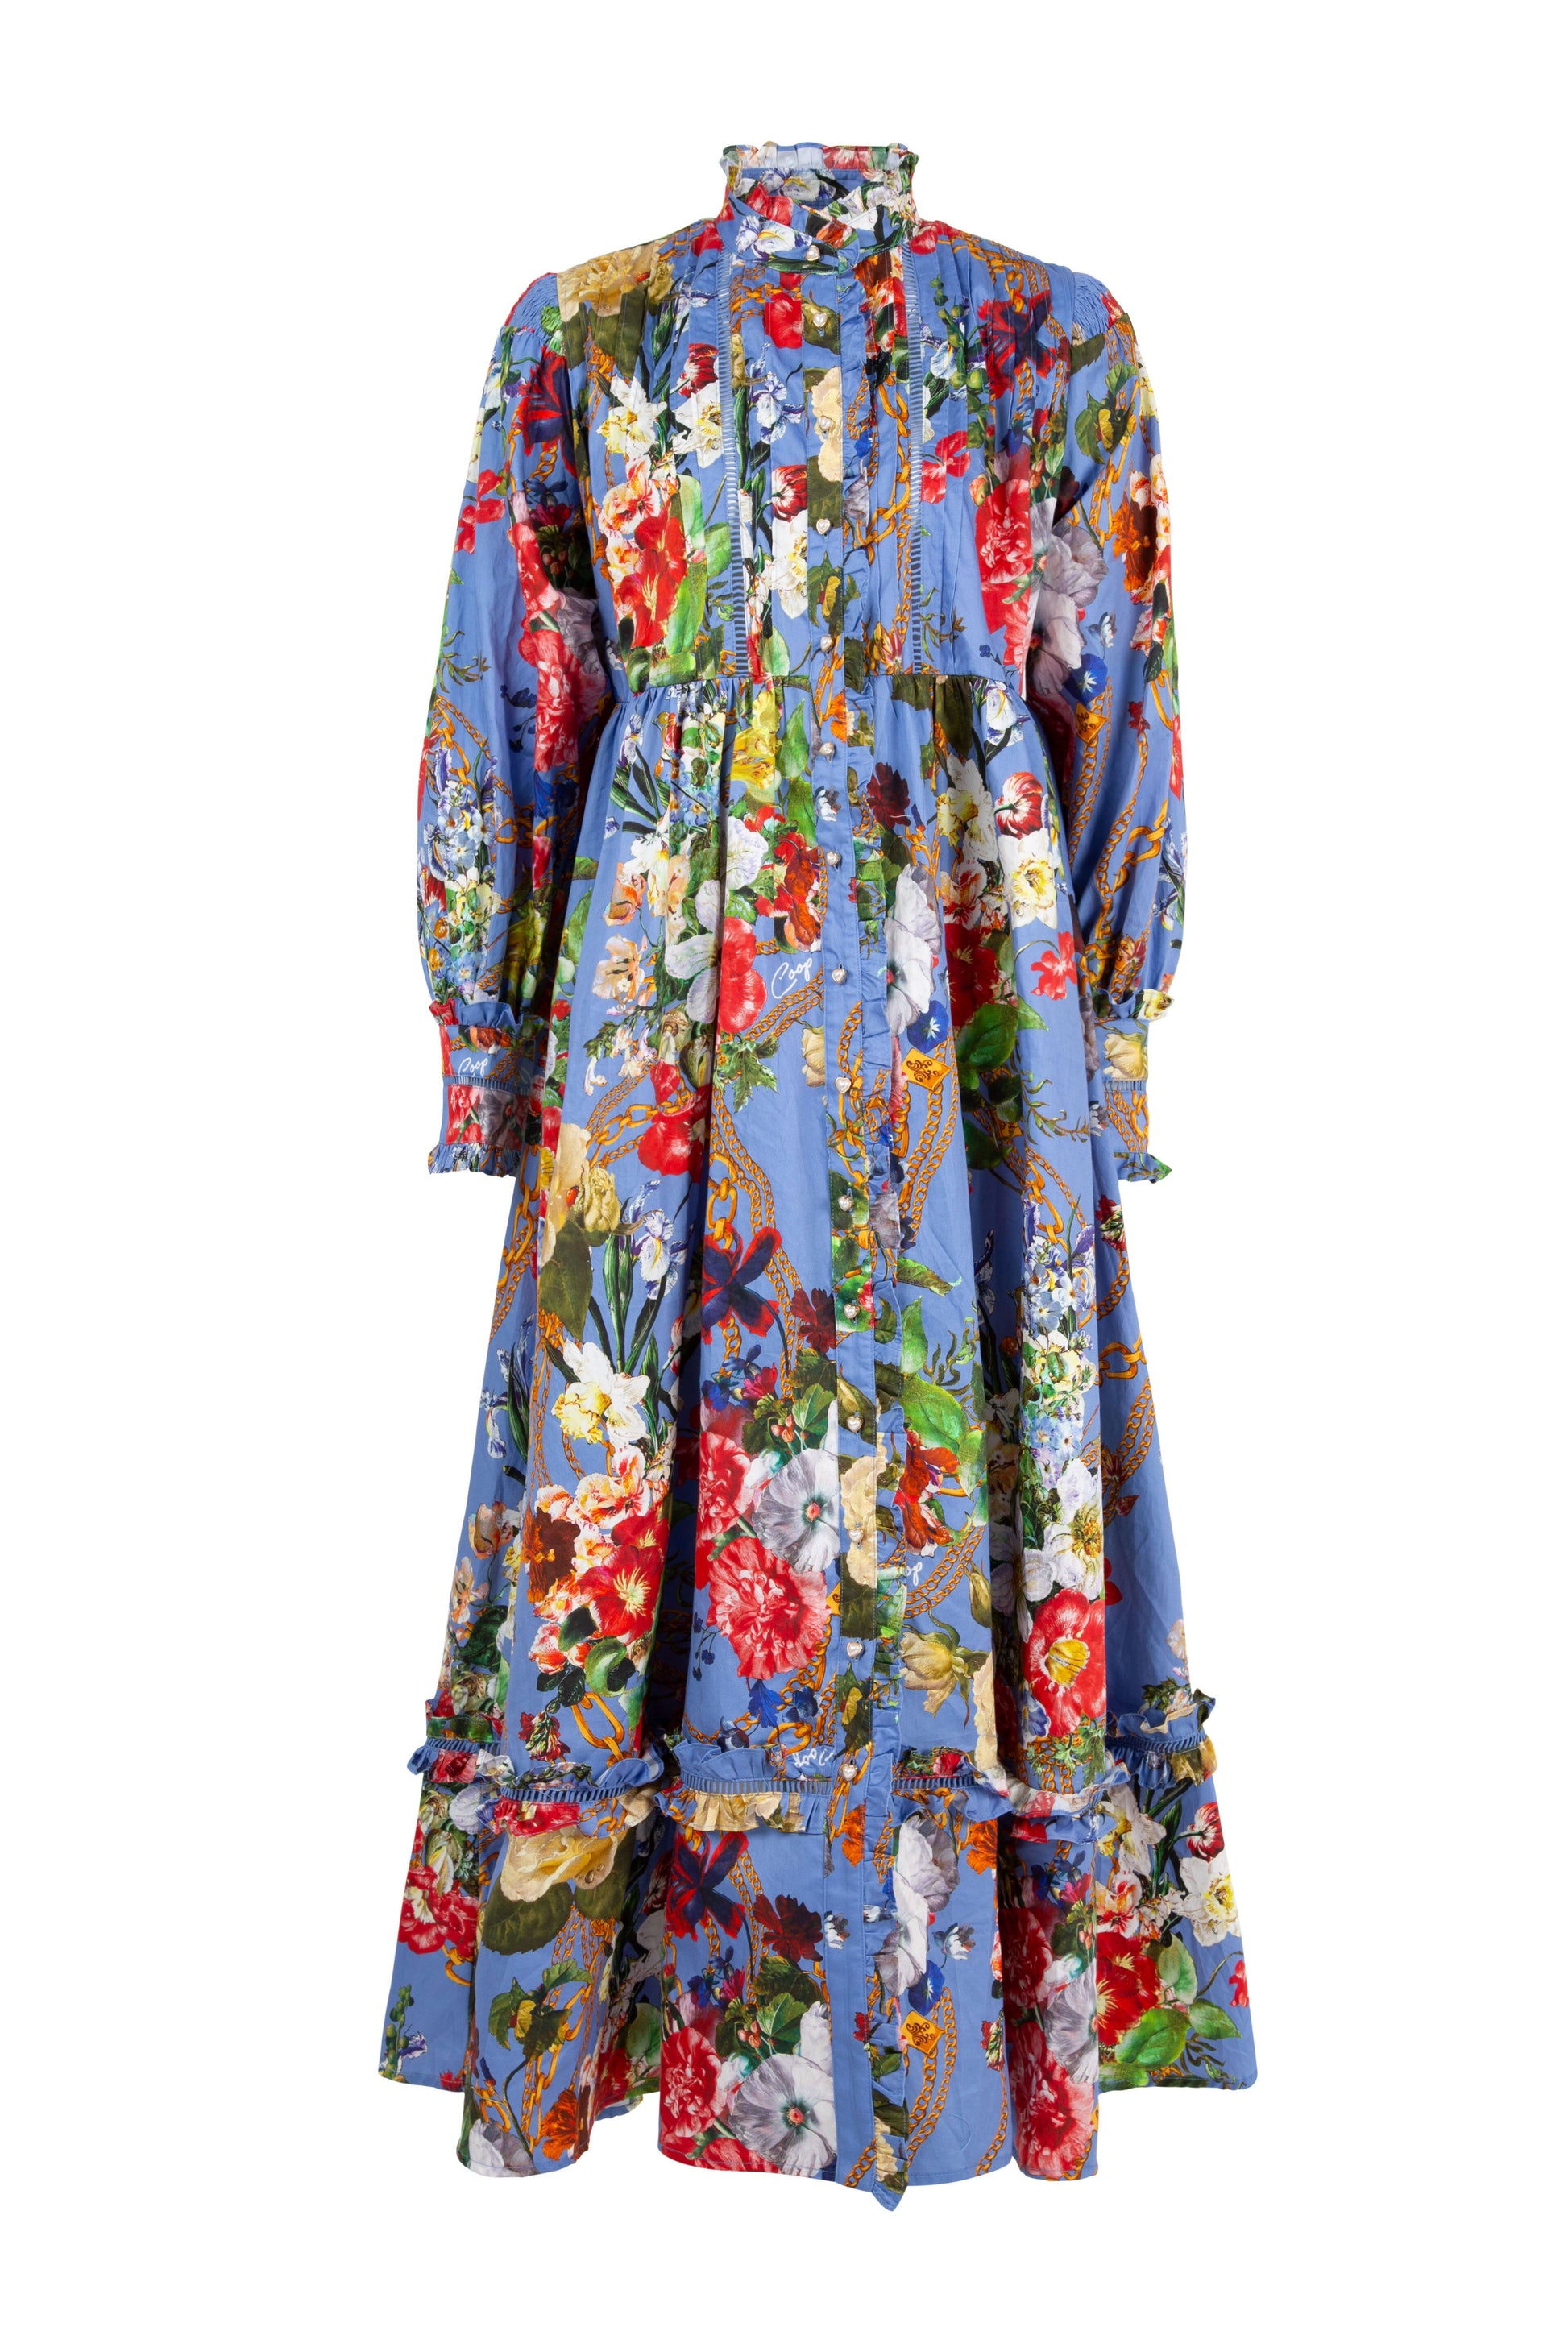 COOP IN IT TO PIN IT DRESS - CORNFLOWER -THE VOGUE STORE